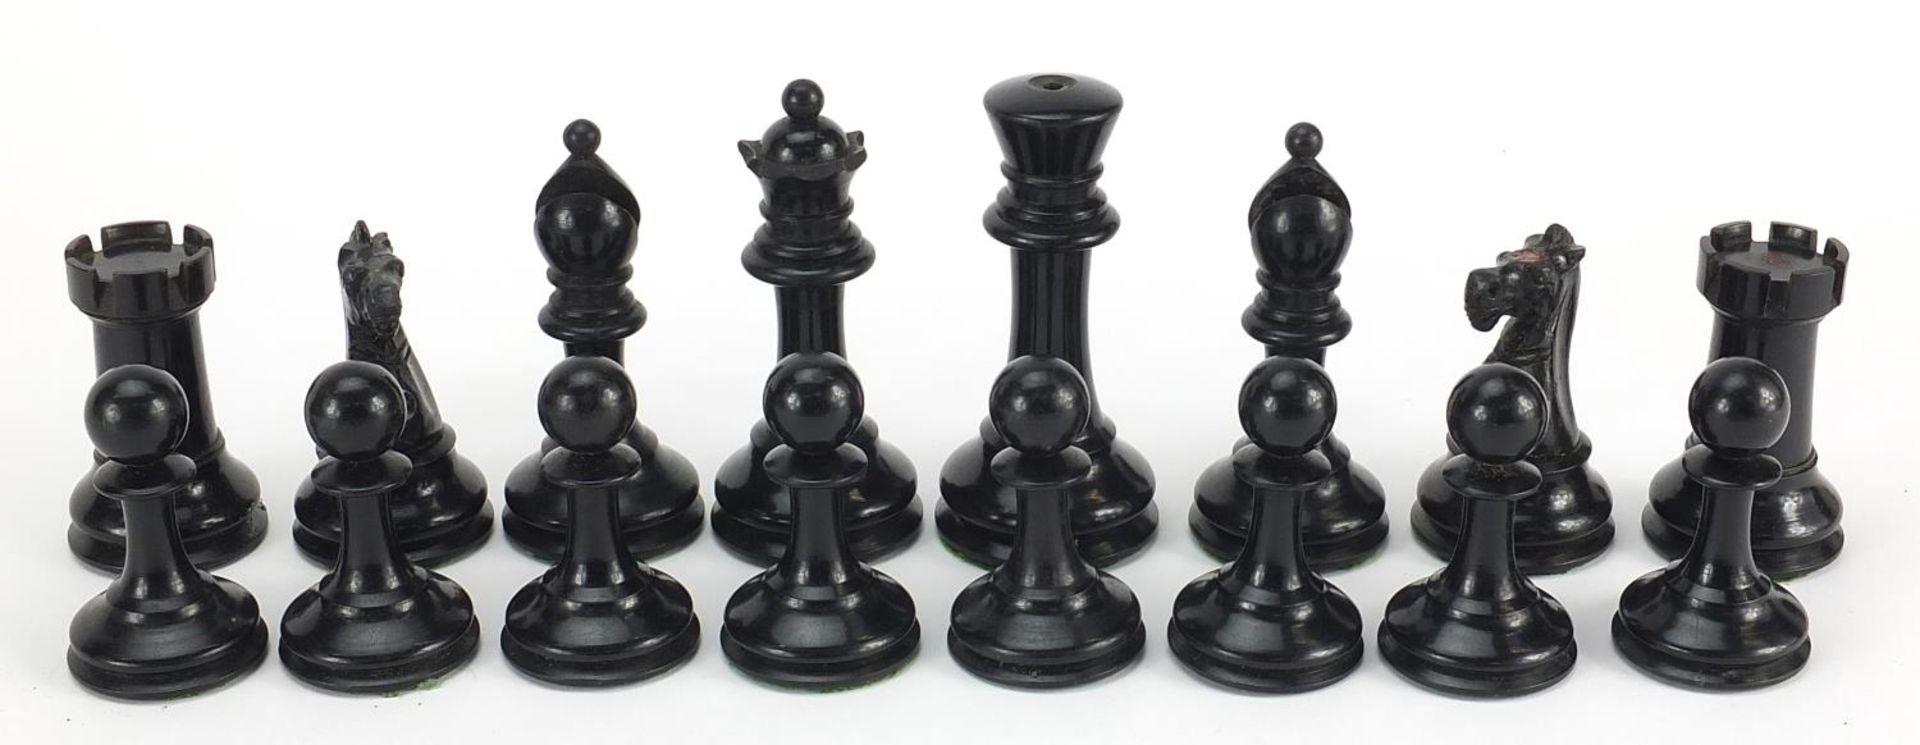 Boxwood and ebony Staunton chess set with mahogany case, possibly by Jaques, the largest piece 8.5cm - Image 4 of 8